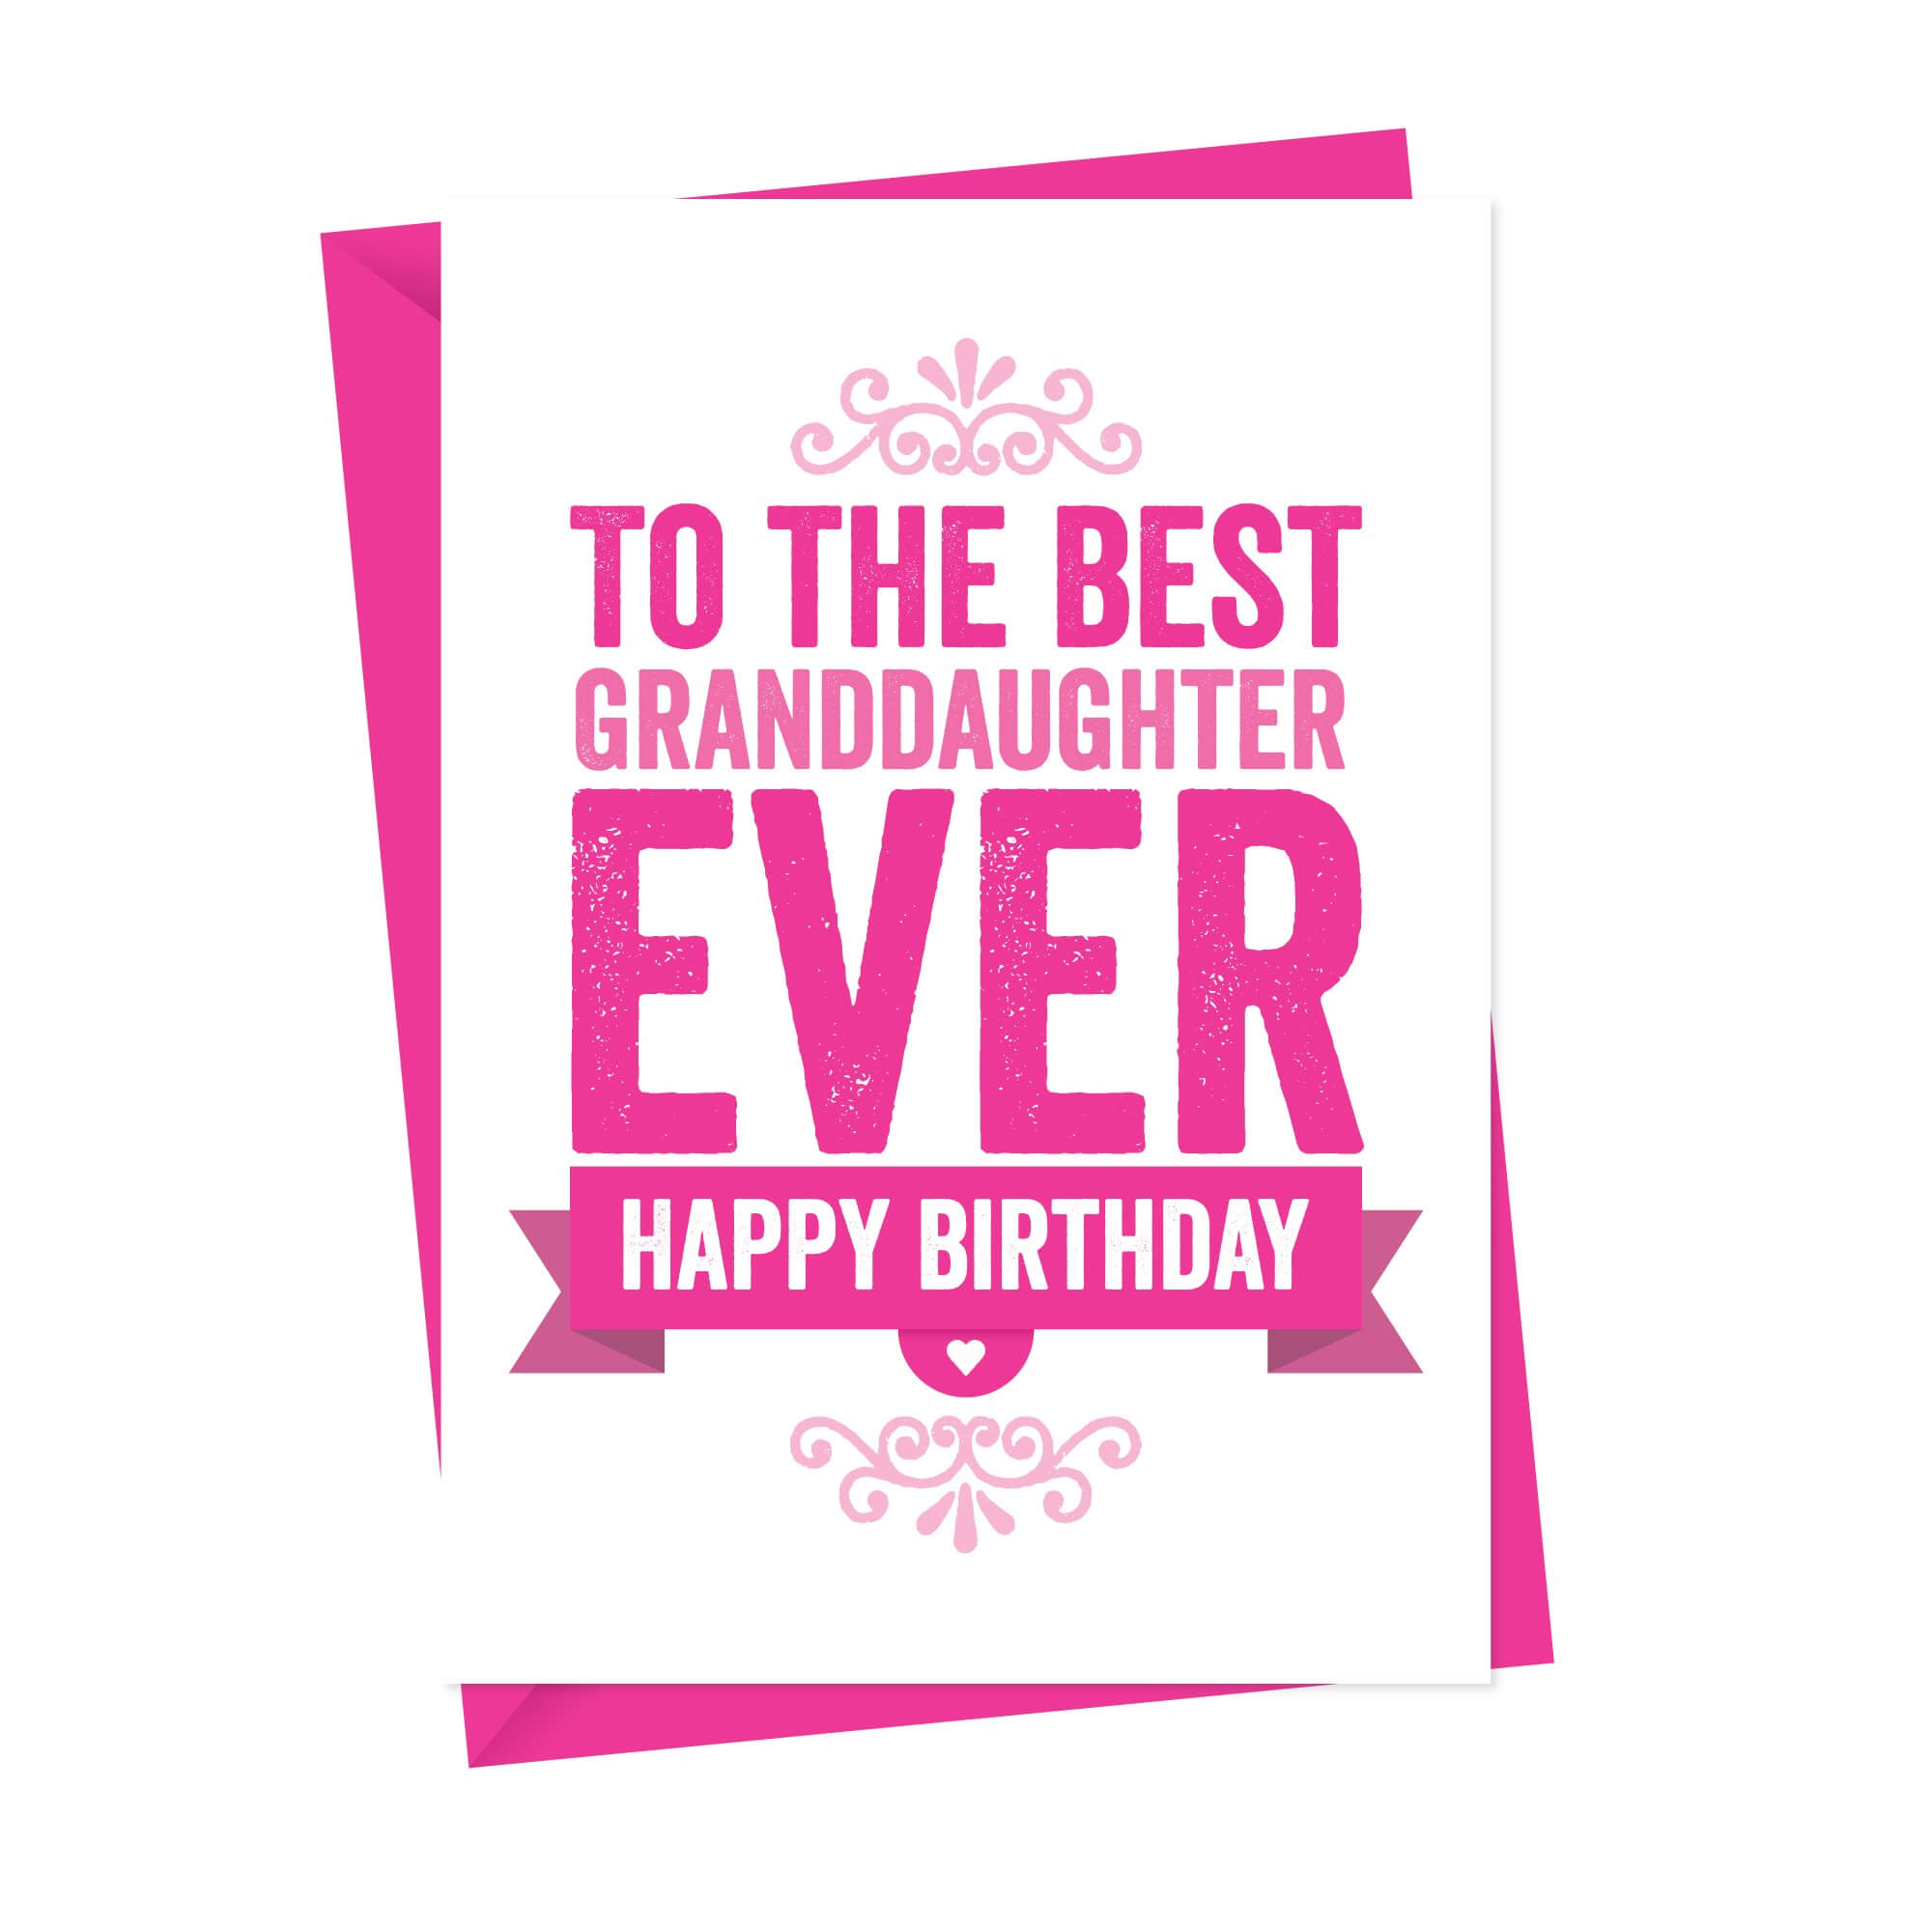 50+ Happy Birthday Wishes for Granddaughter – Greeting Cards, Messages, Quotes, Cake Images.